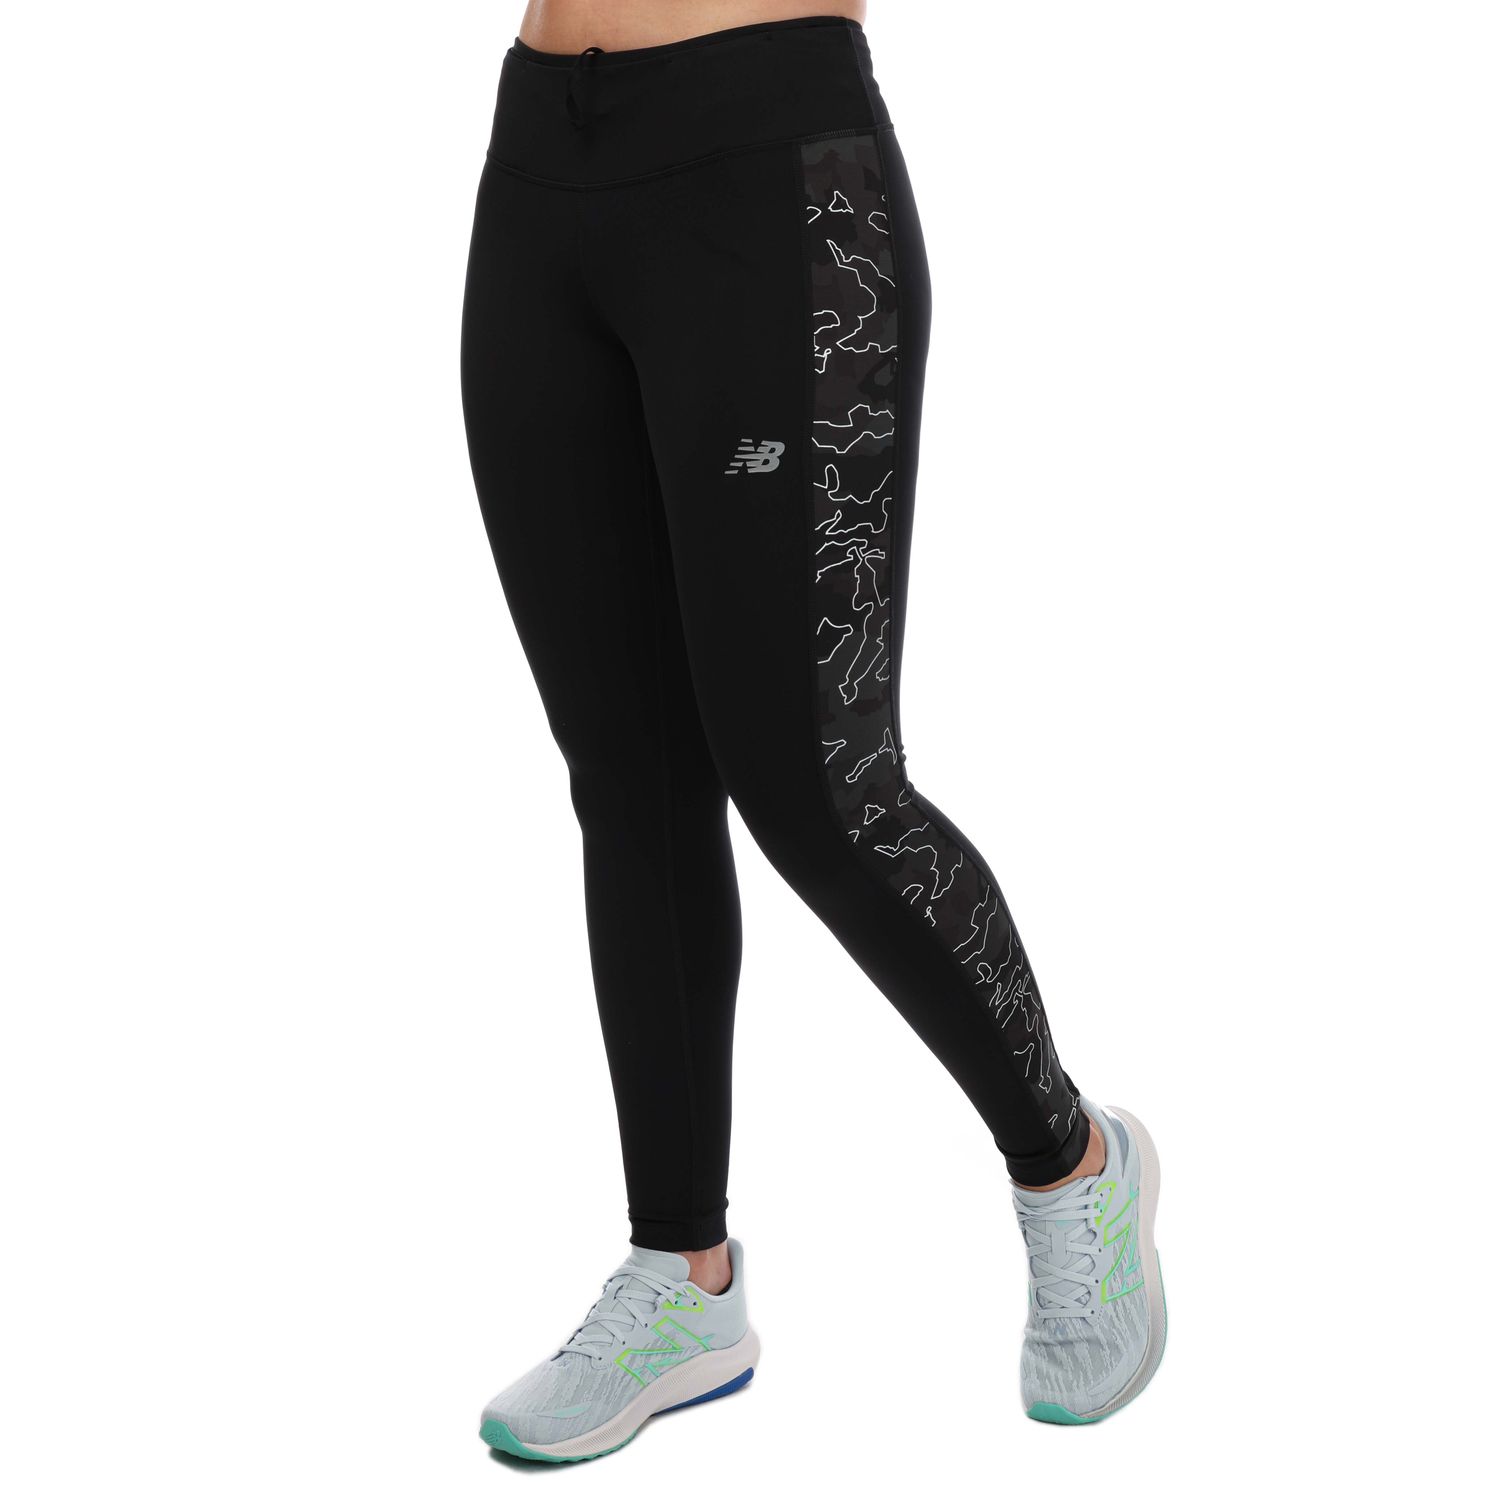 https://gtl-uk.prod.myauroraassets.com/p/218160/womens-reflective-print-accelerate-tights-wp23235phmnew-balance-womens-reflective-print-accelerate-tights-wp23235phm.jpg?t=rp&w=1500&h=1500